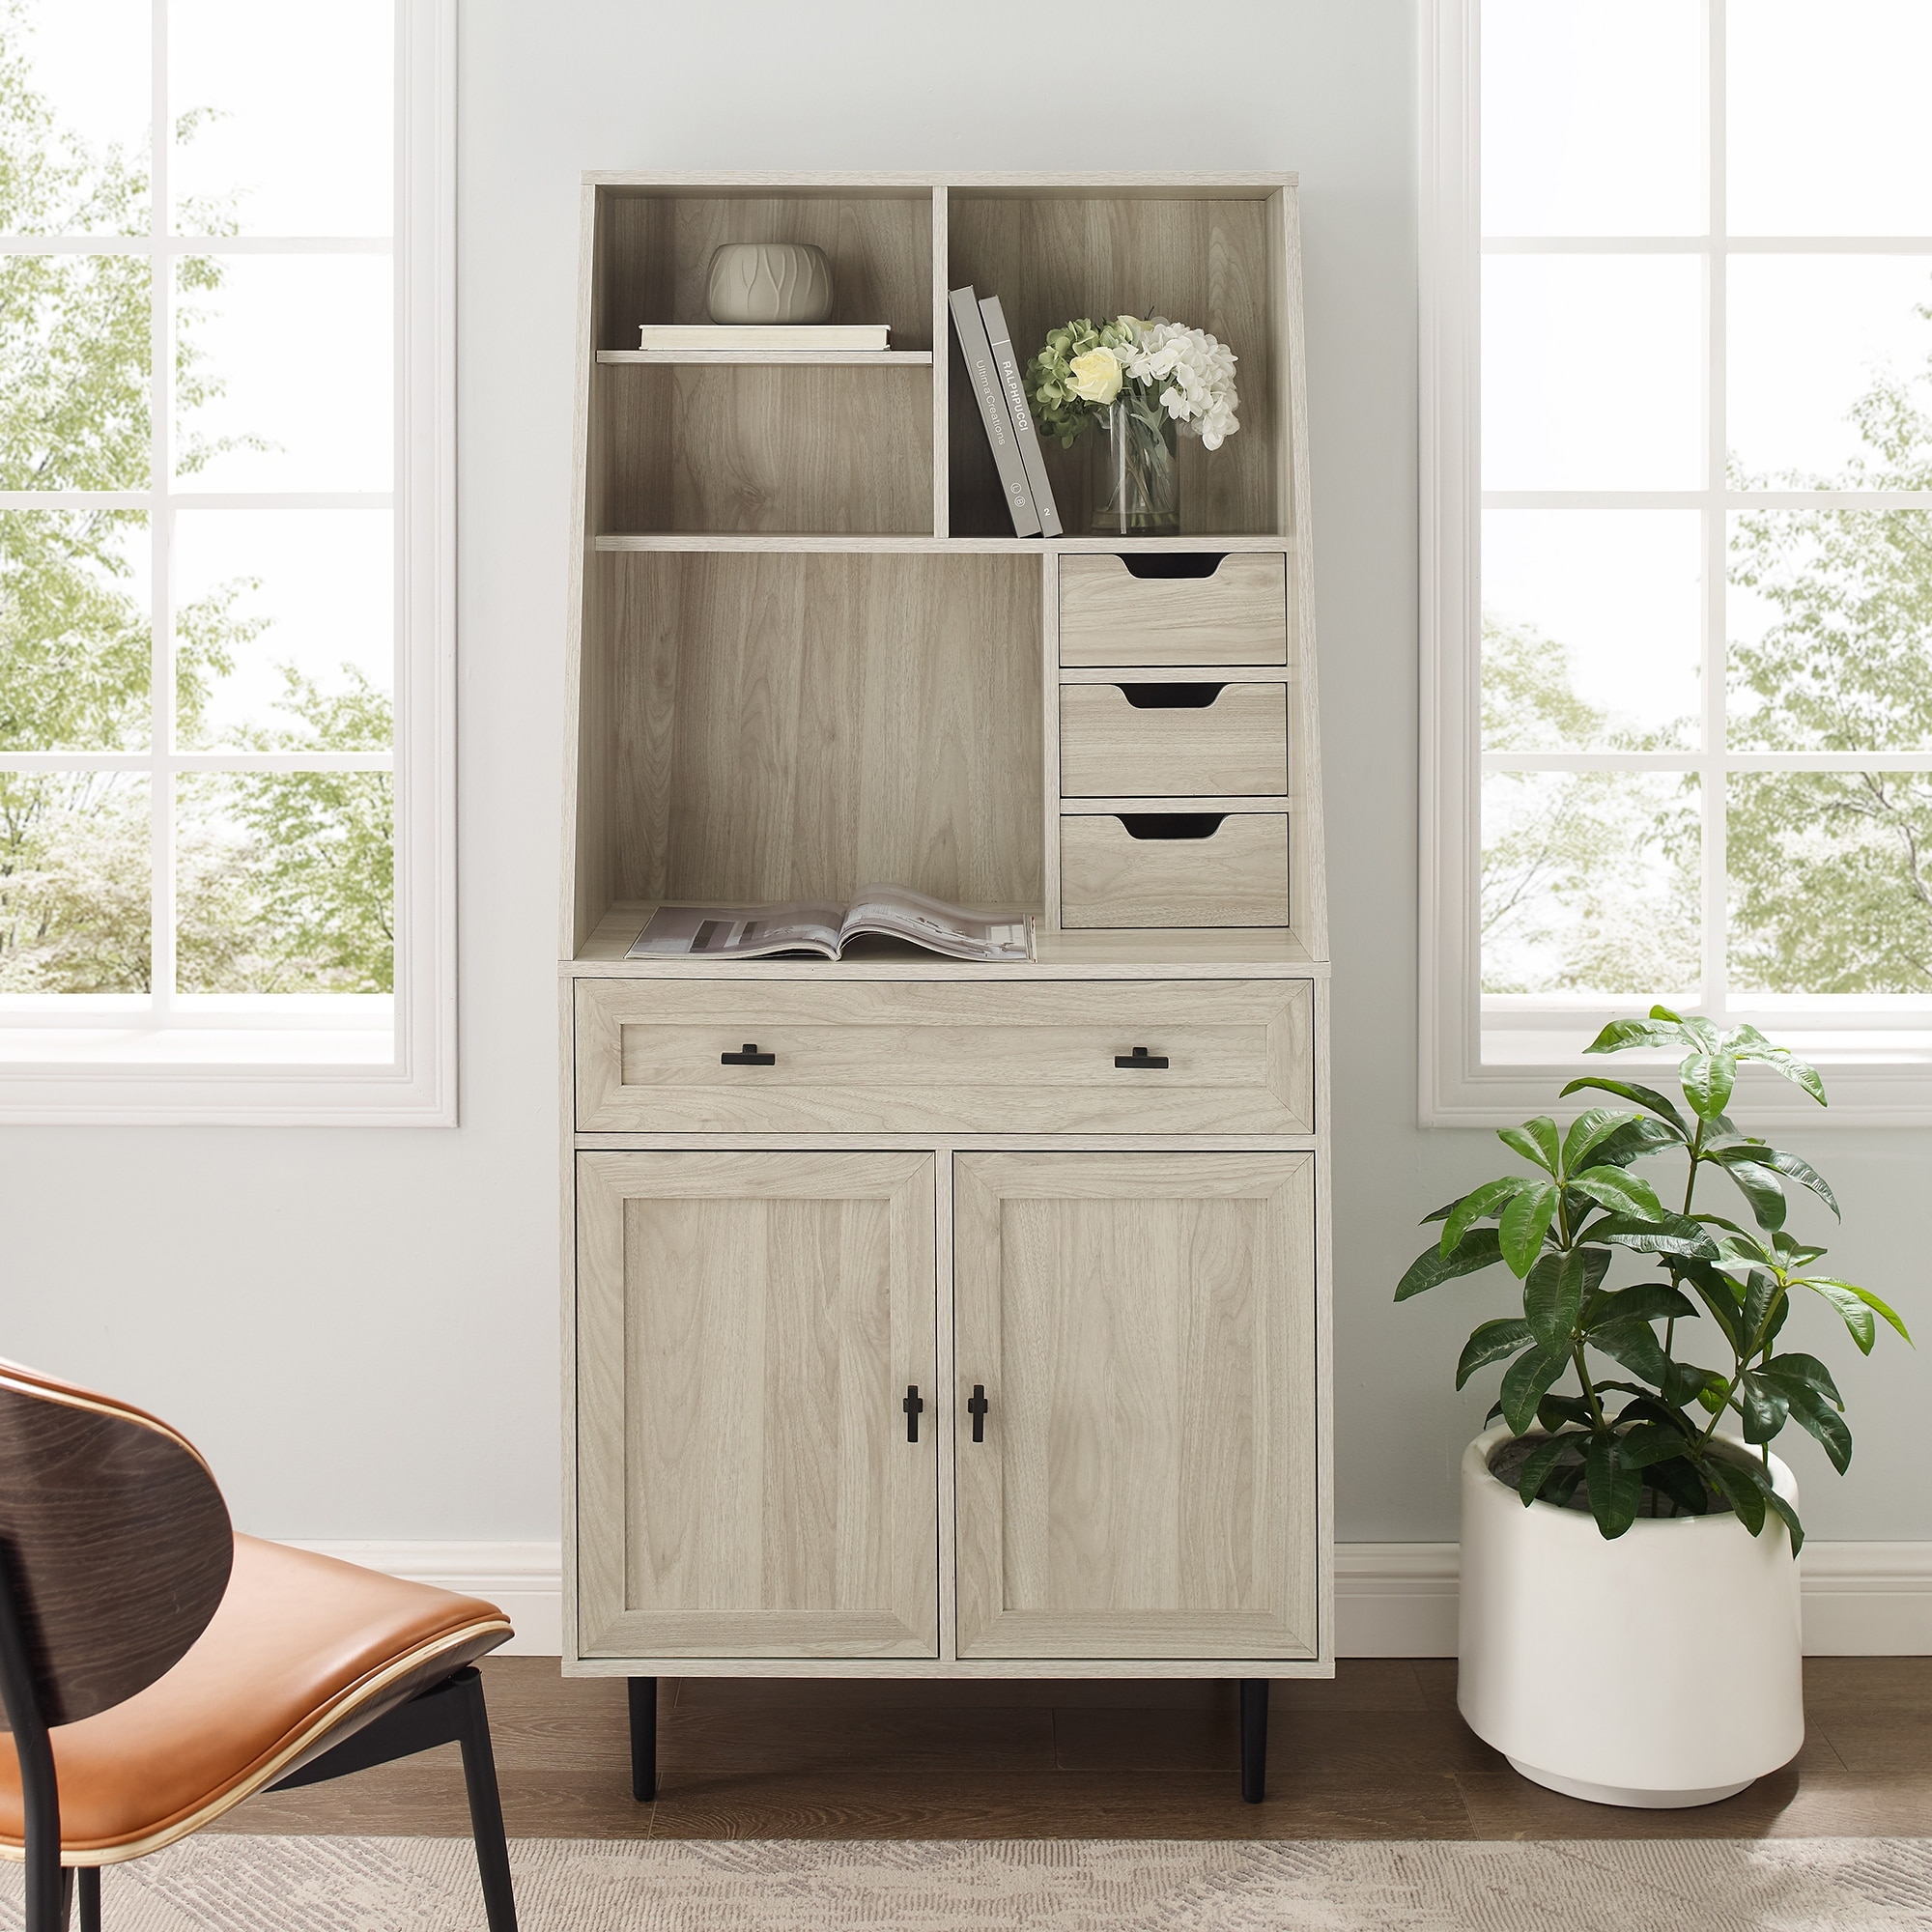 https://ak1.ostkcdn.com/images/products/is/images/direct/4bf6dfa75bffc792550730e5275a05f7adf64c05/Middlebrook-Modern-Hutch-Cabinet-with-Pull-out-Desk.jpg